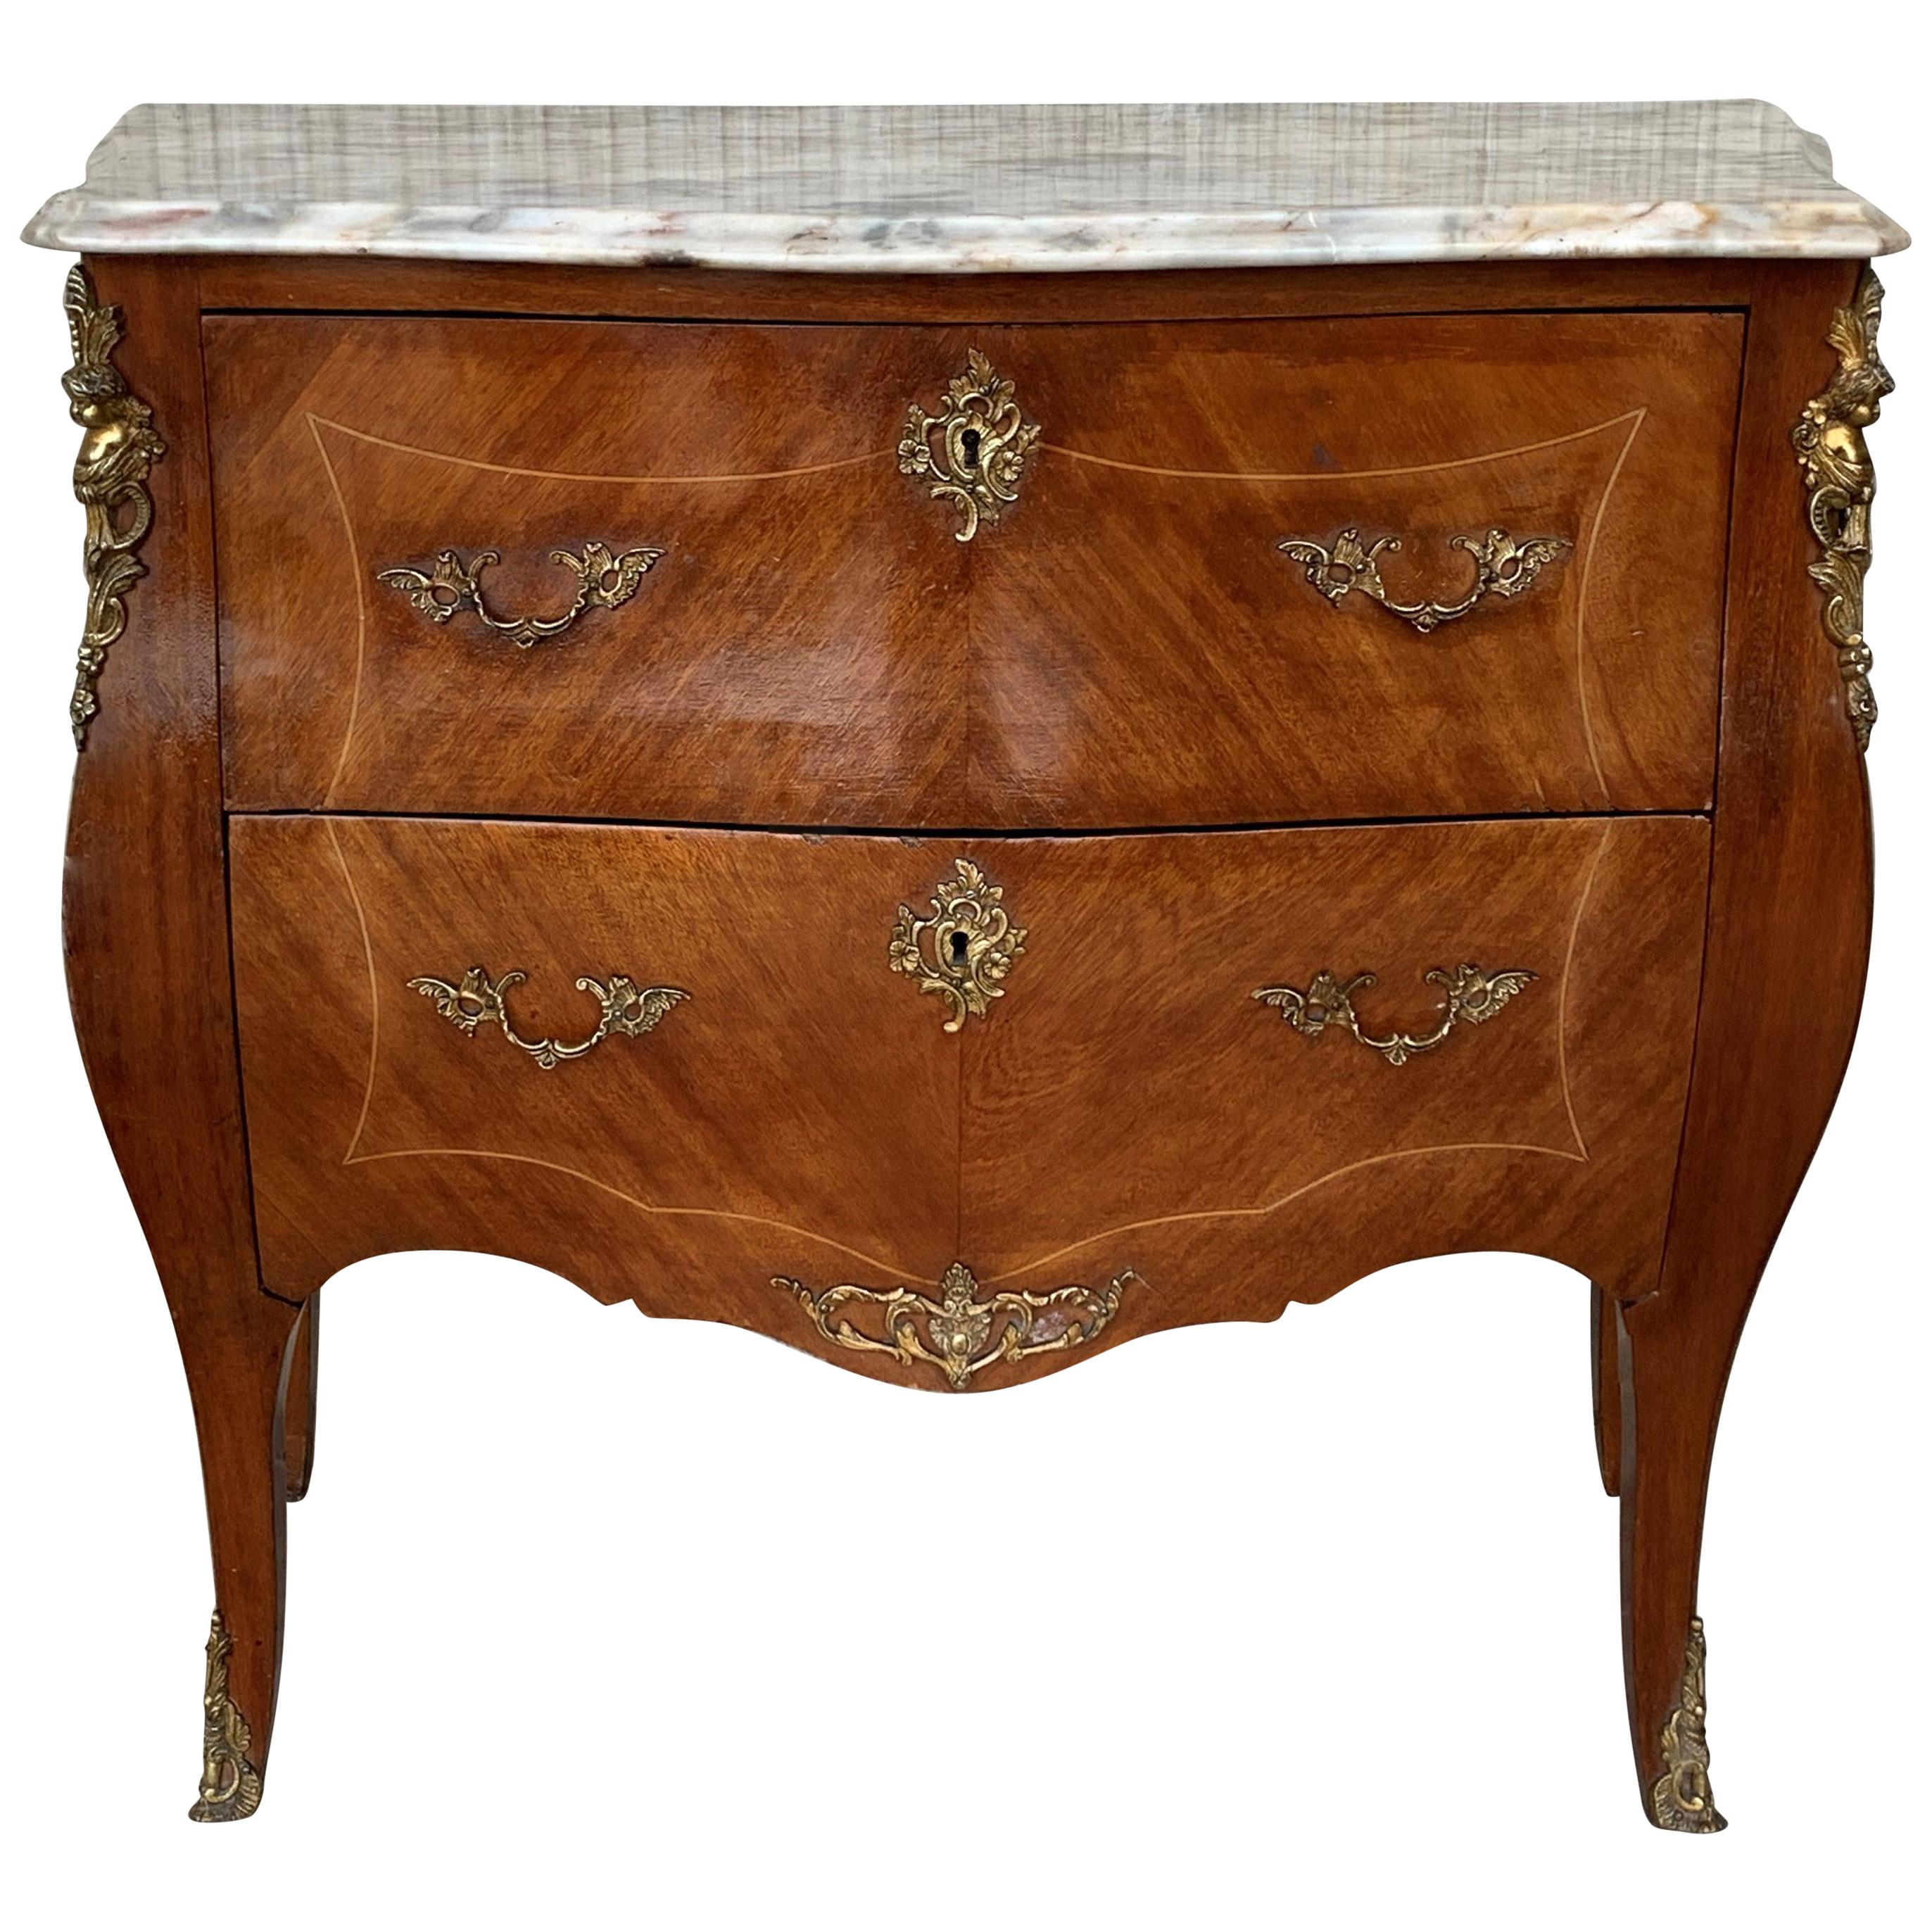 20th Century French Louis XV Marble-Top Bombe Chest or Commode with Two Drawers